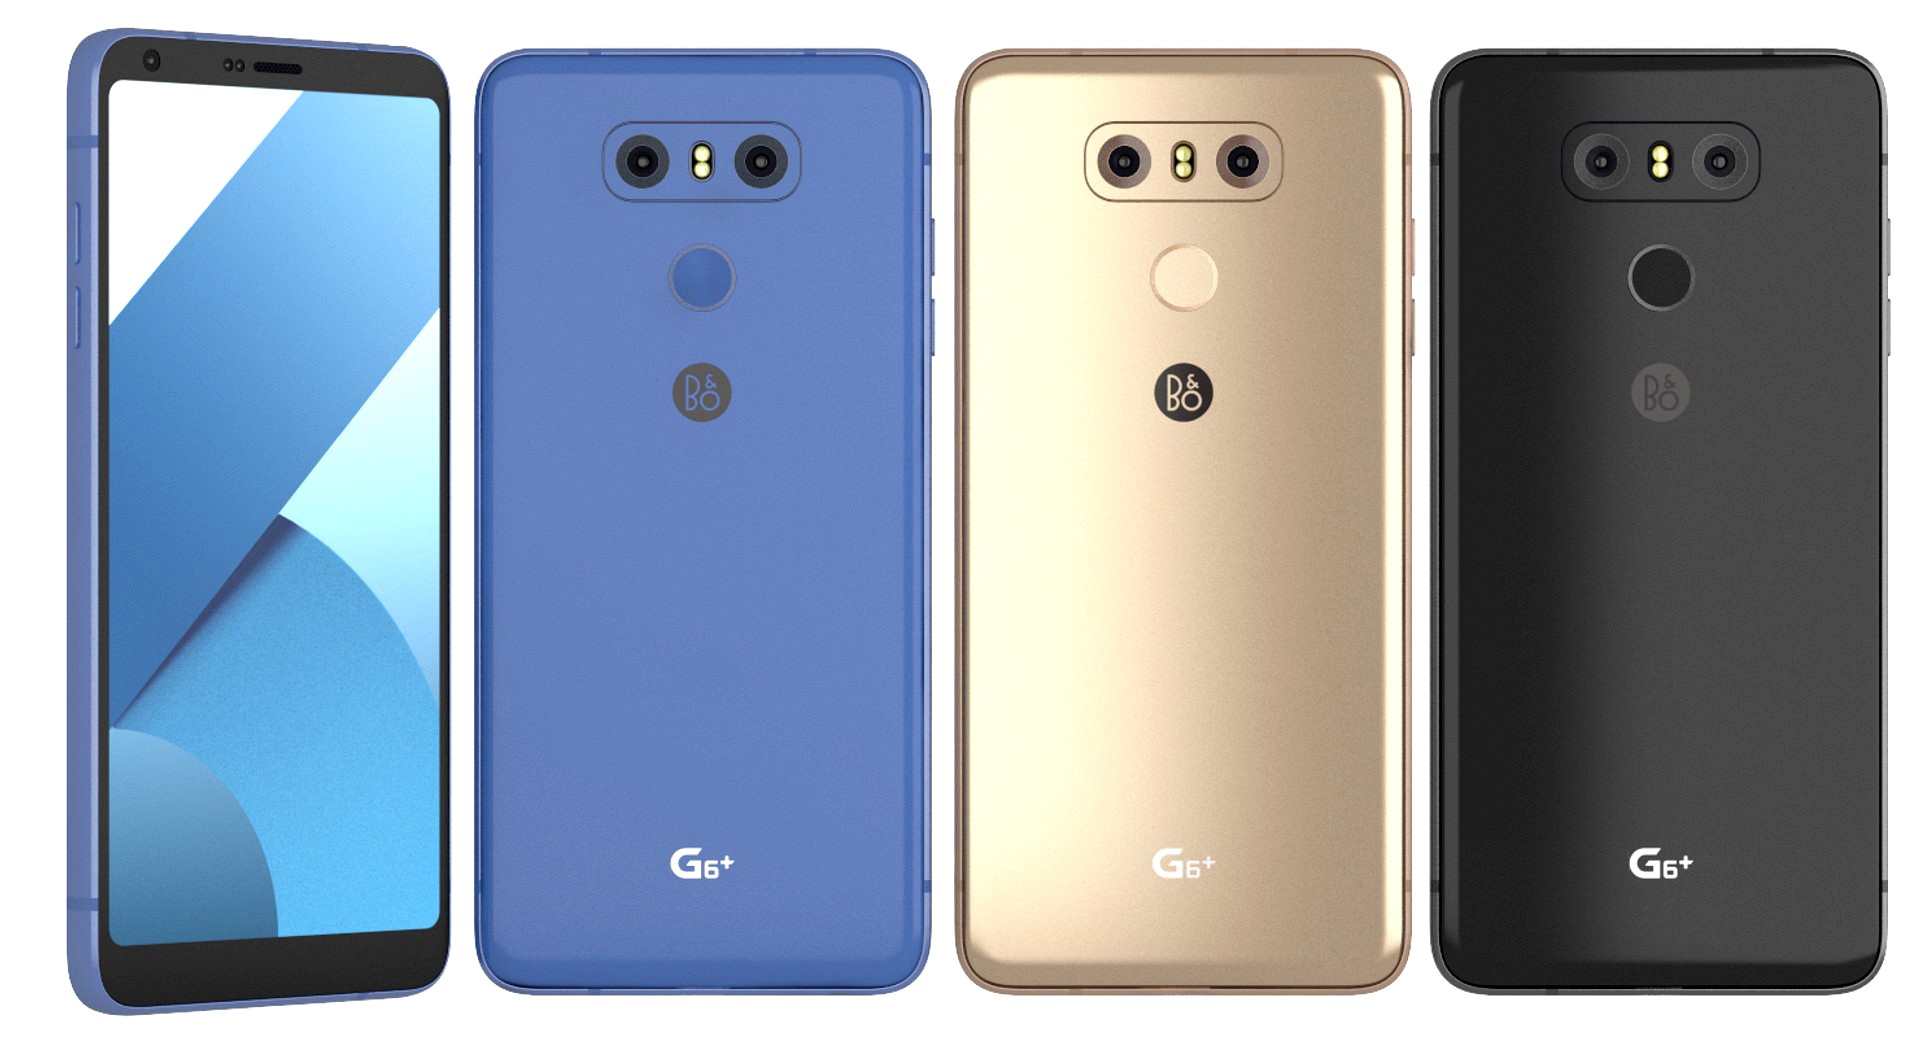 LG G6+ all colours